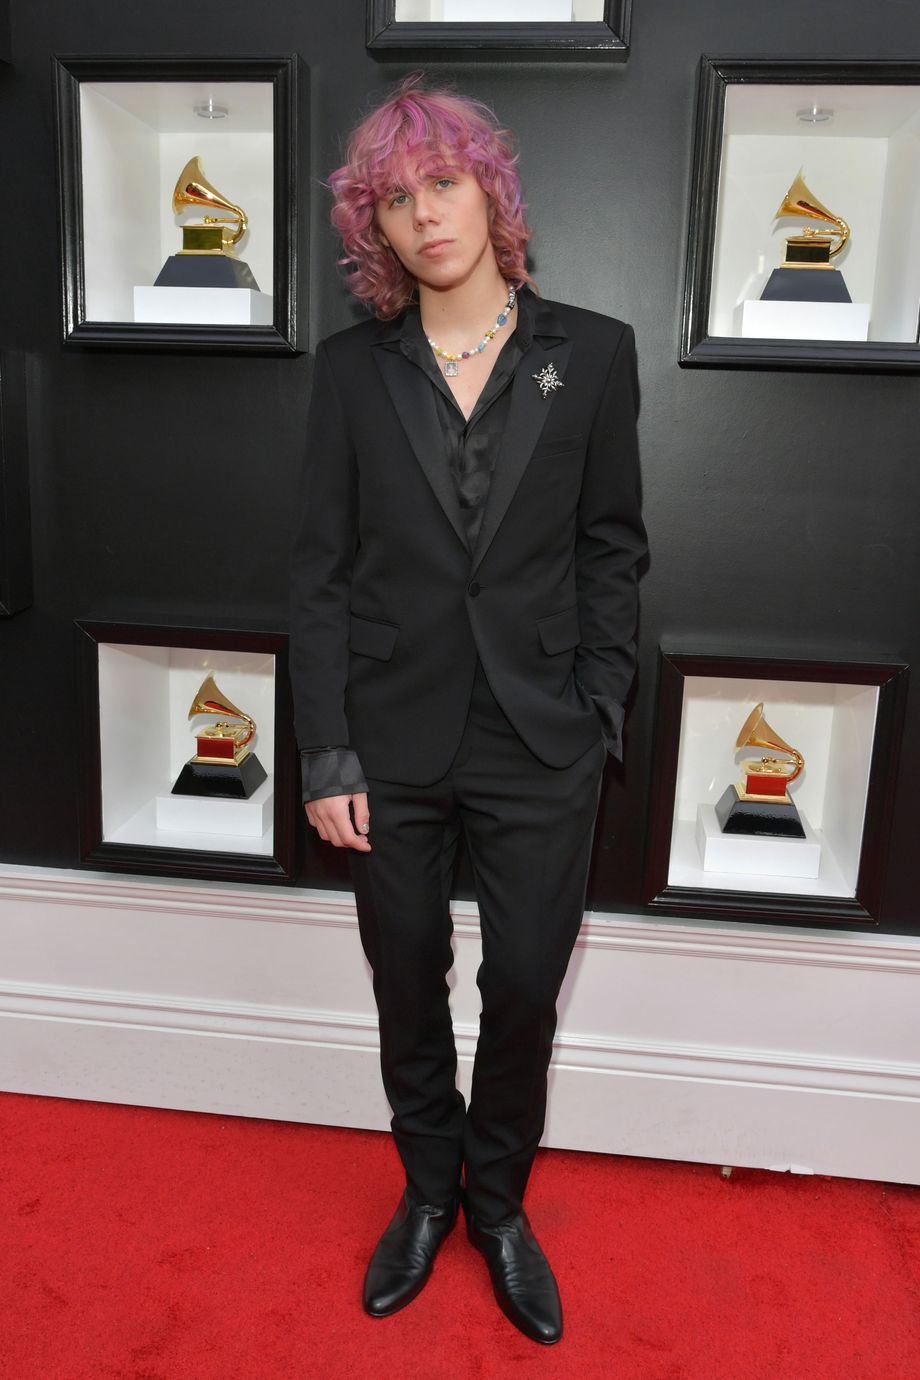 Grammys 2022: Fashion—Live From the Red Carpet